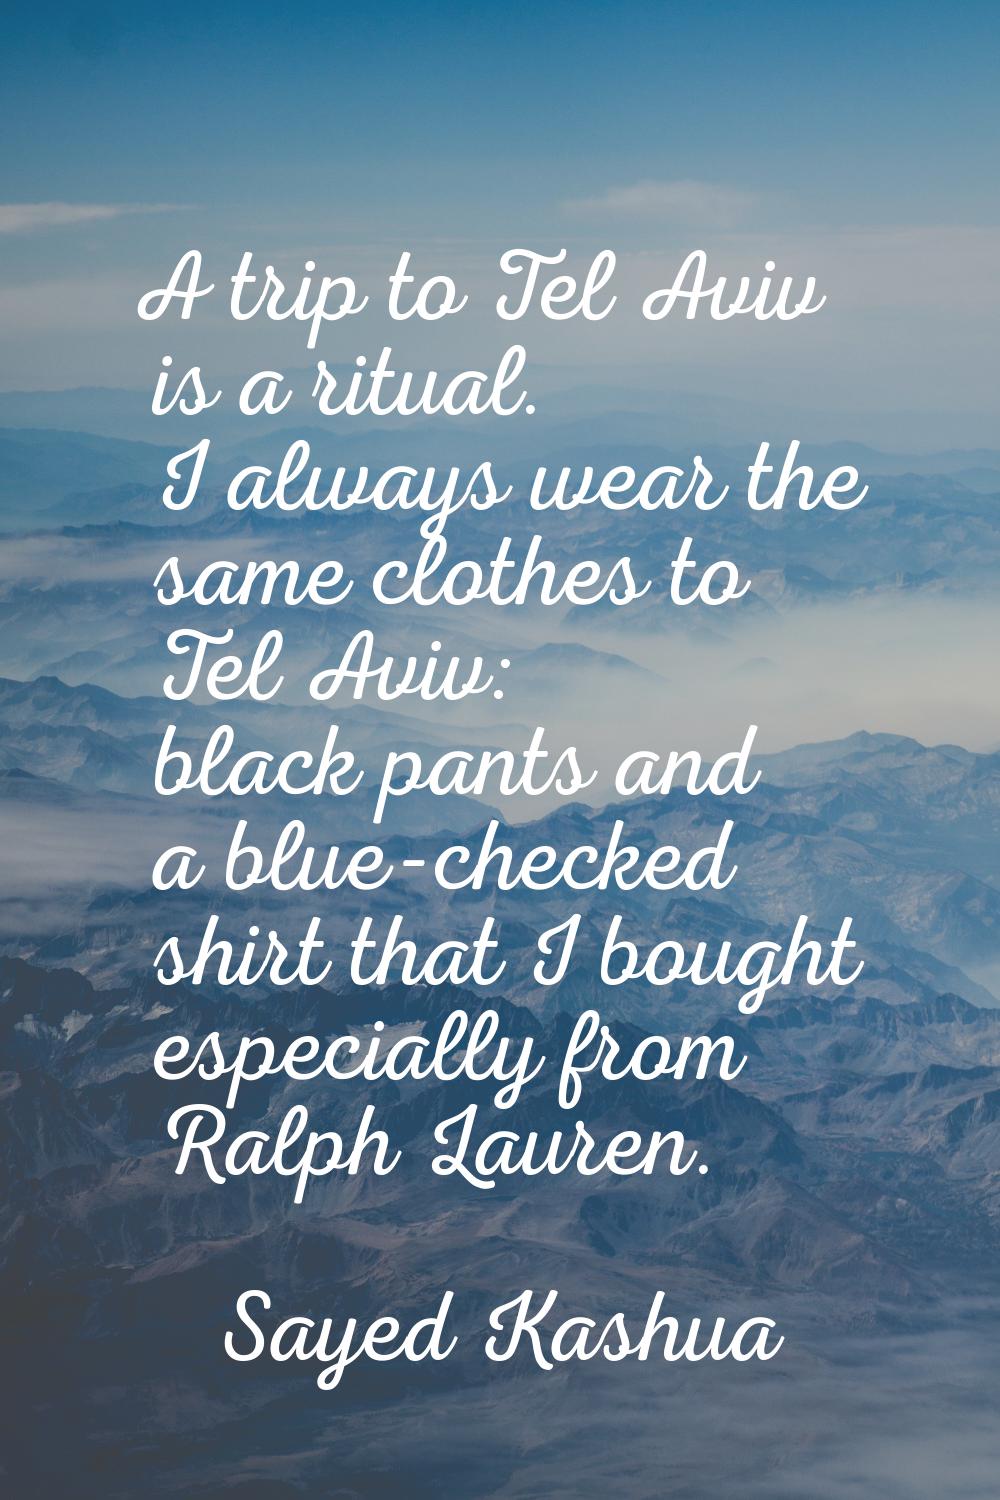 A trip to Tel Aviv is a ritual. I always wear the same clothes to Tel Aviv: black pants and a blue-